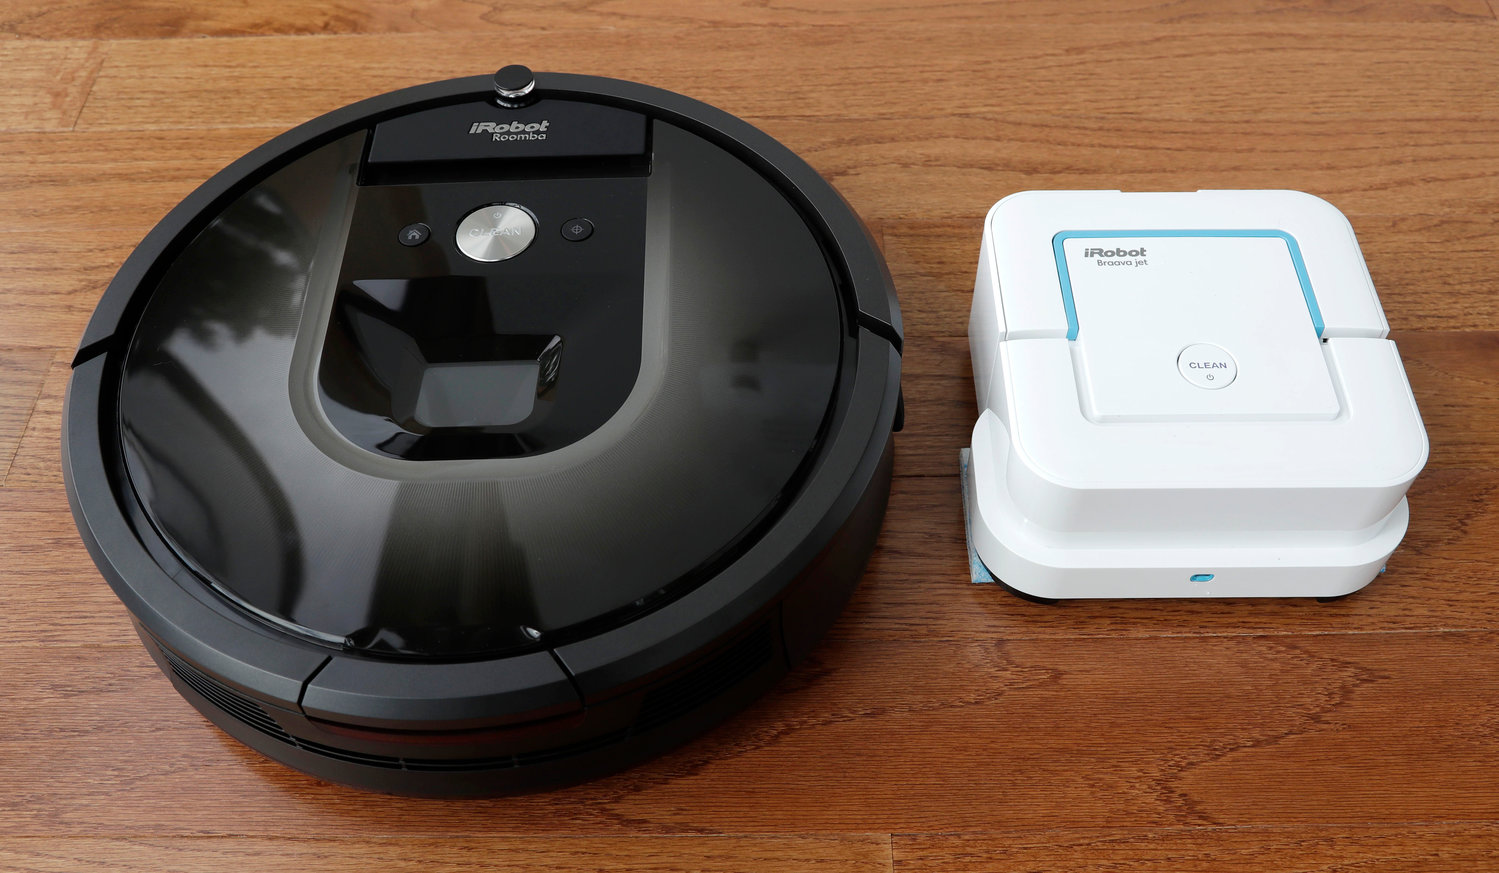 An iRobot Roomba vacuum, left, and Braava Jet floor cleaner are displayed at the company’s headquarters in Bedford, Mass.